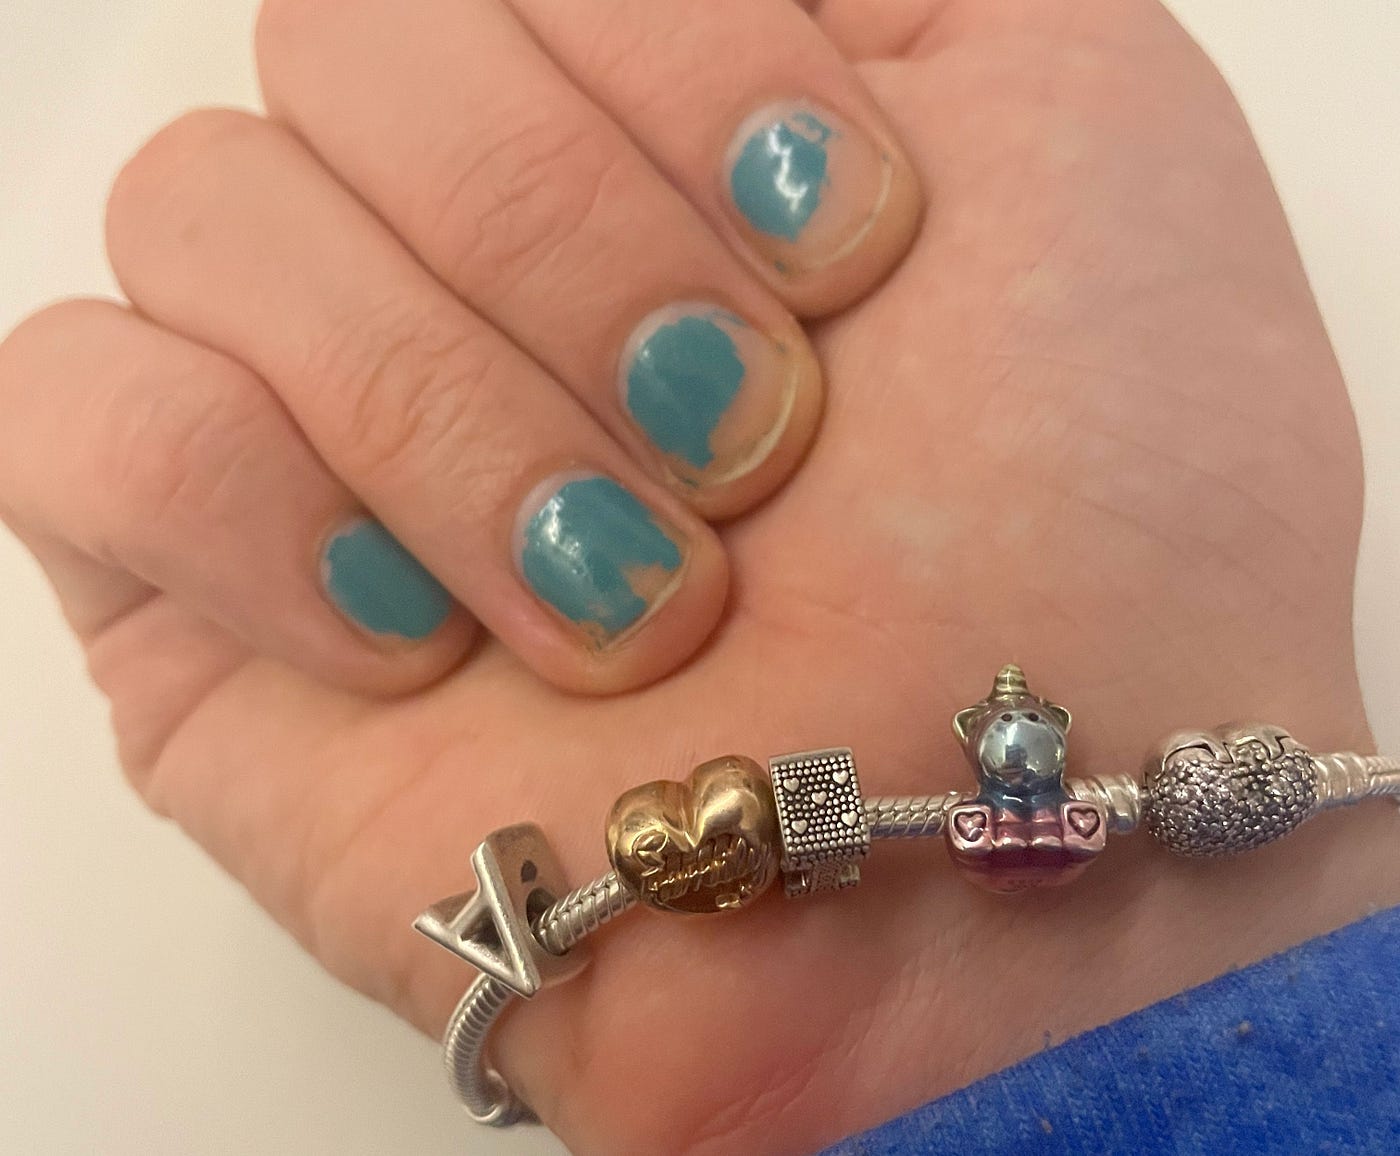 How To Open Pandora Bracelet (Even Without Using Your Nails